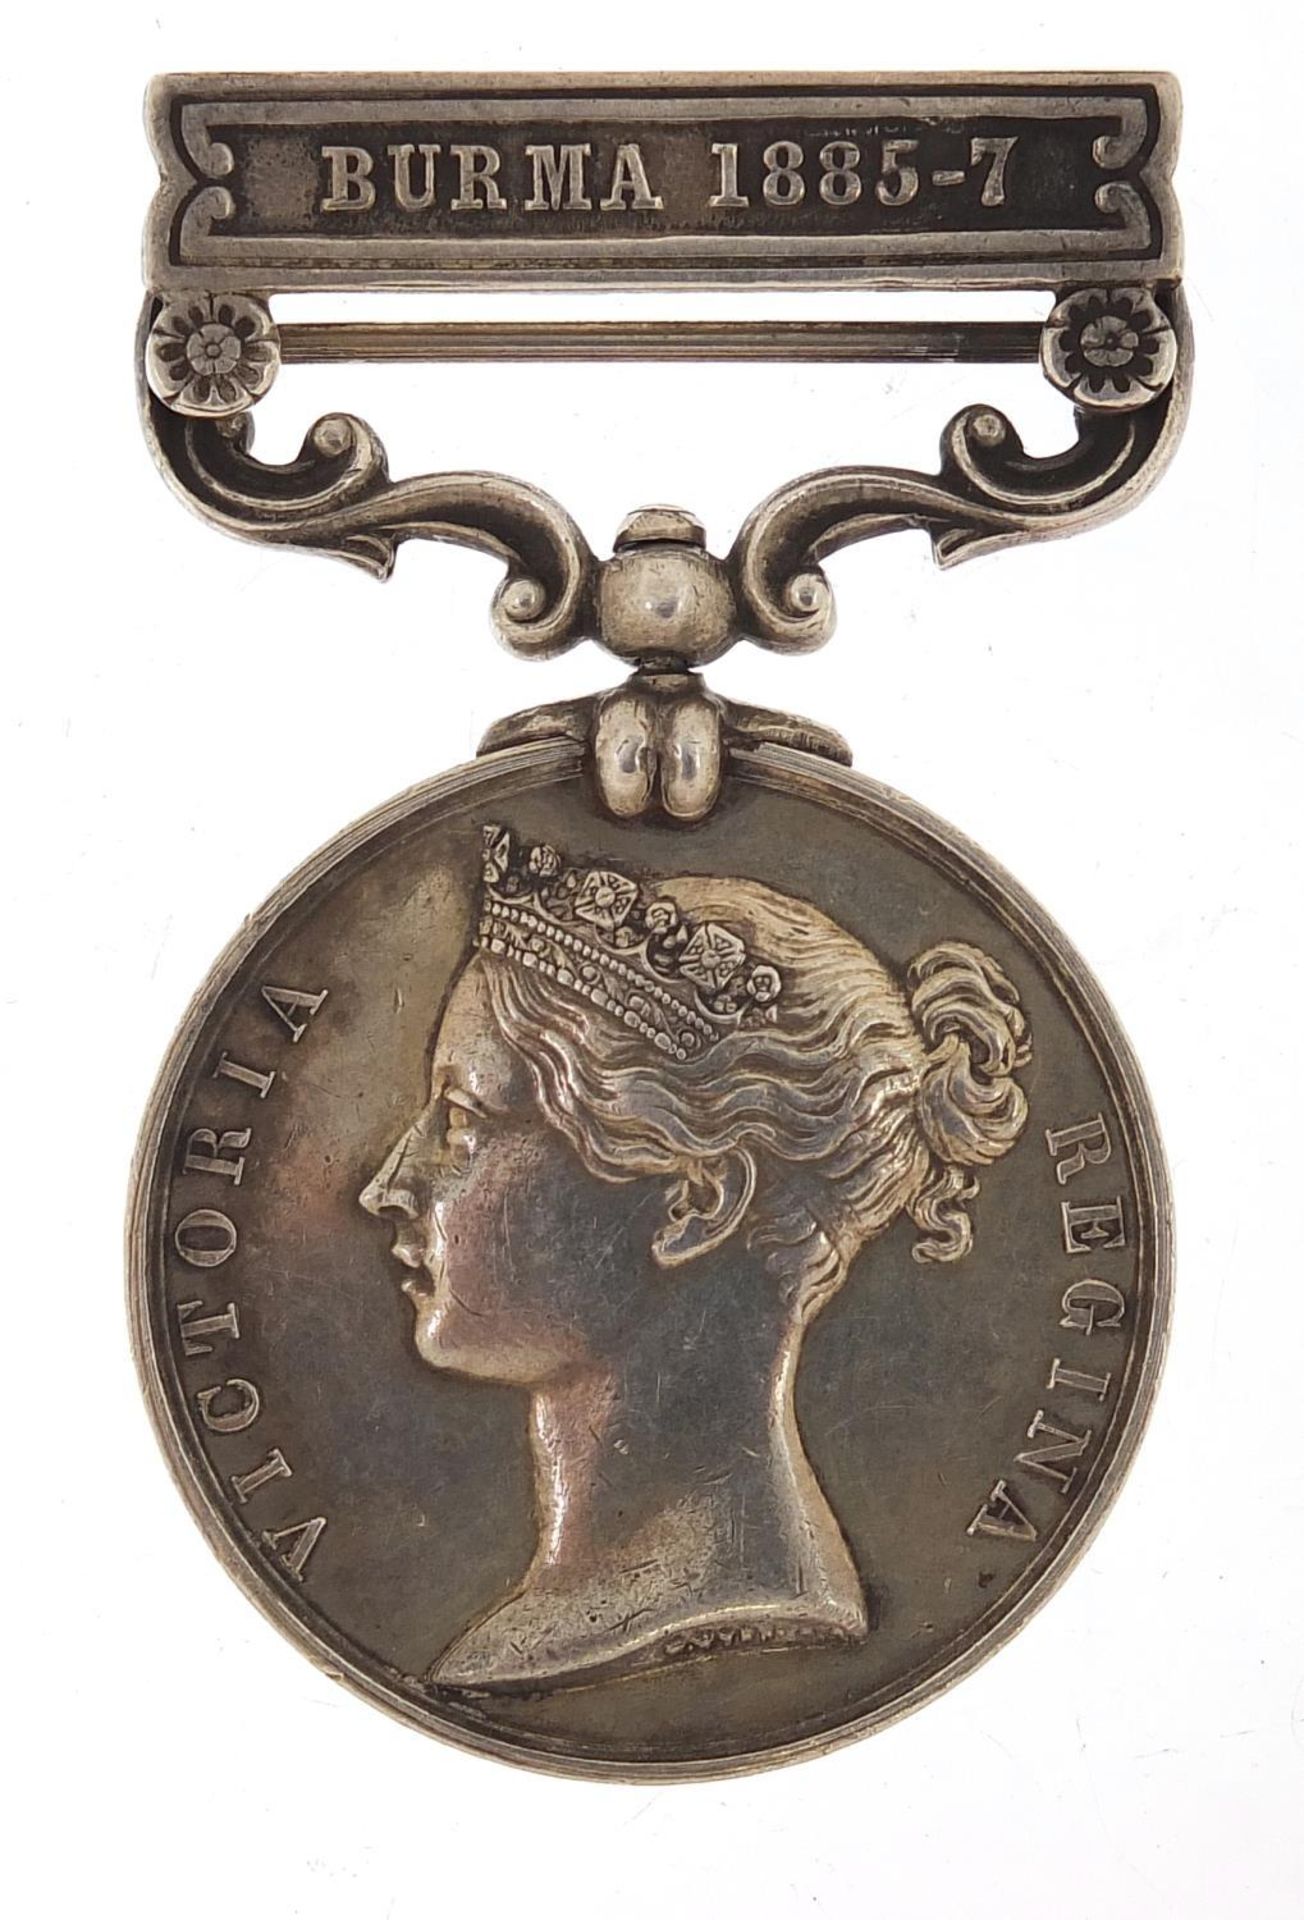 Victorian British military India General Service medal with Burma 1885-7 bar awarded to 605PTE.P.